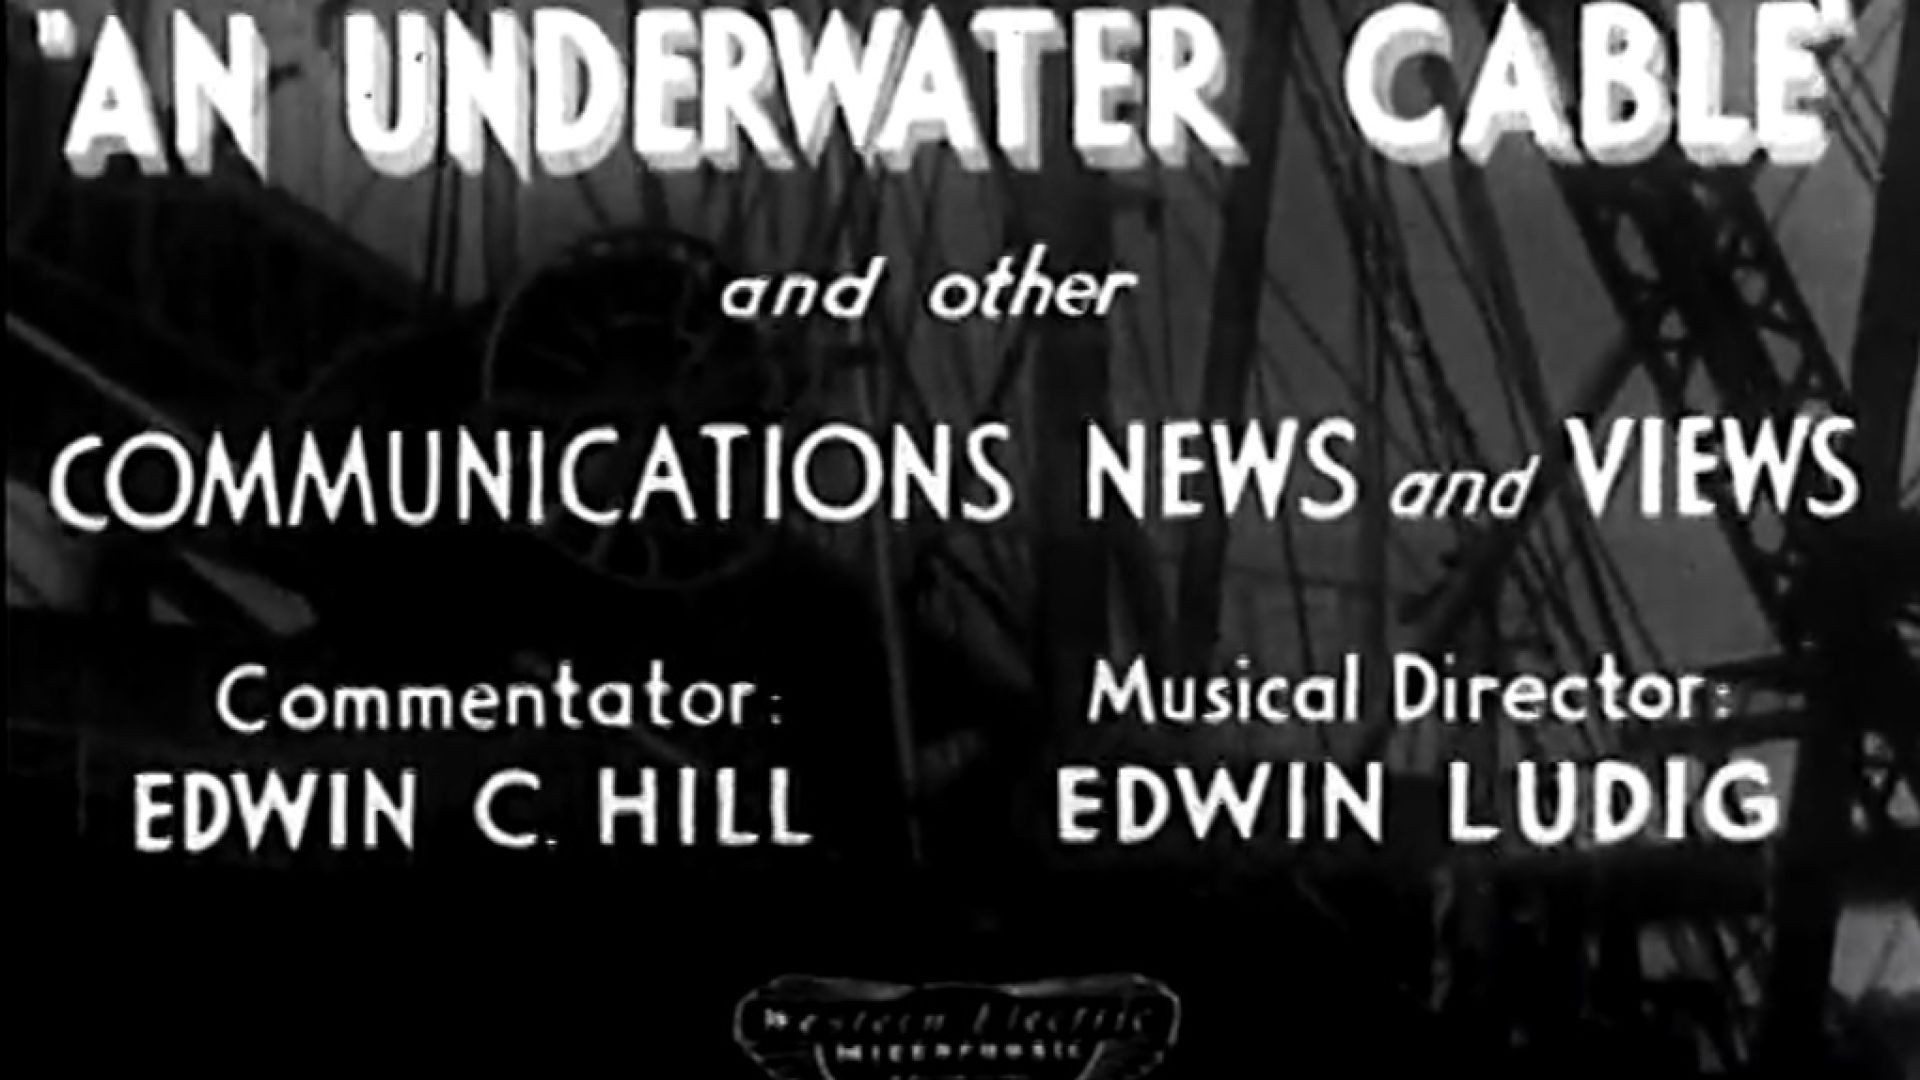 An Underwater Cable and other Communications News and Views (1938)